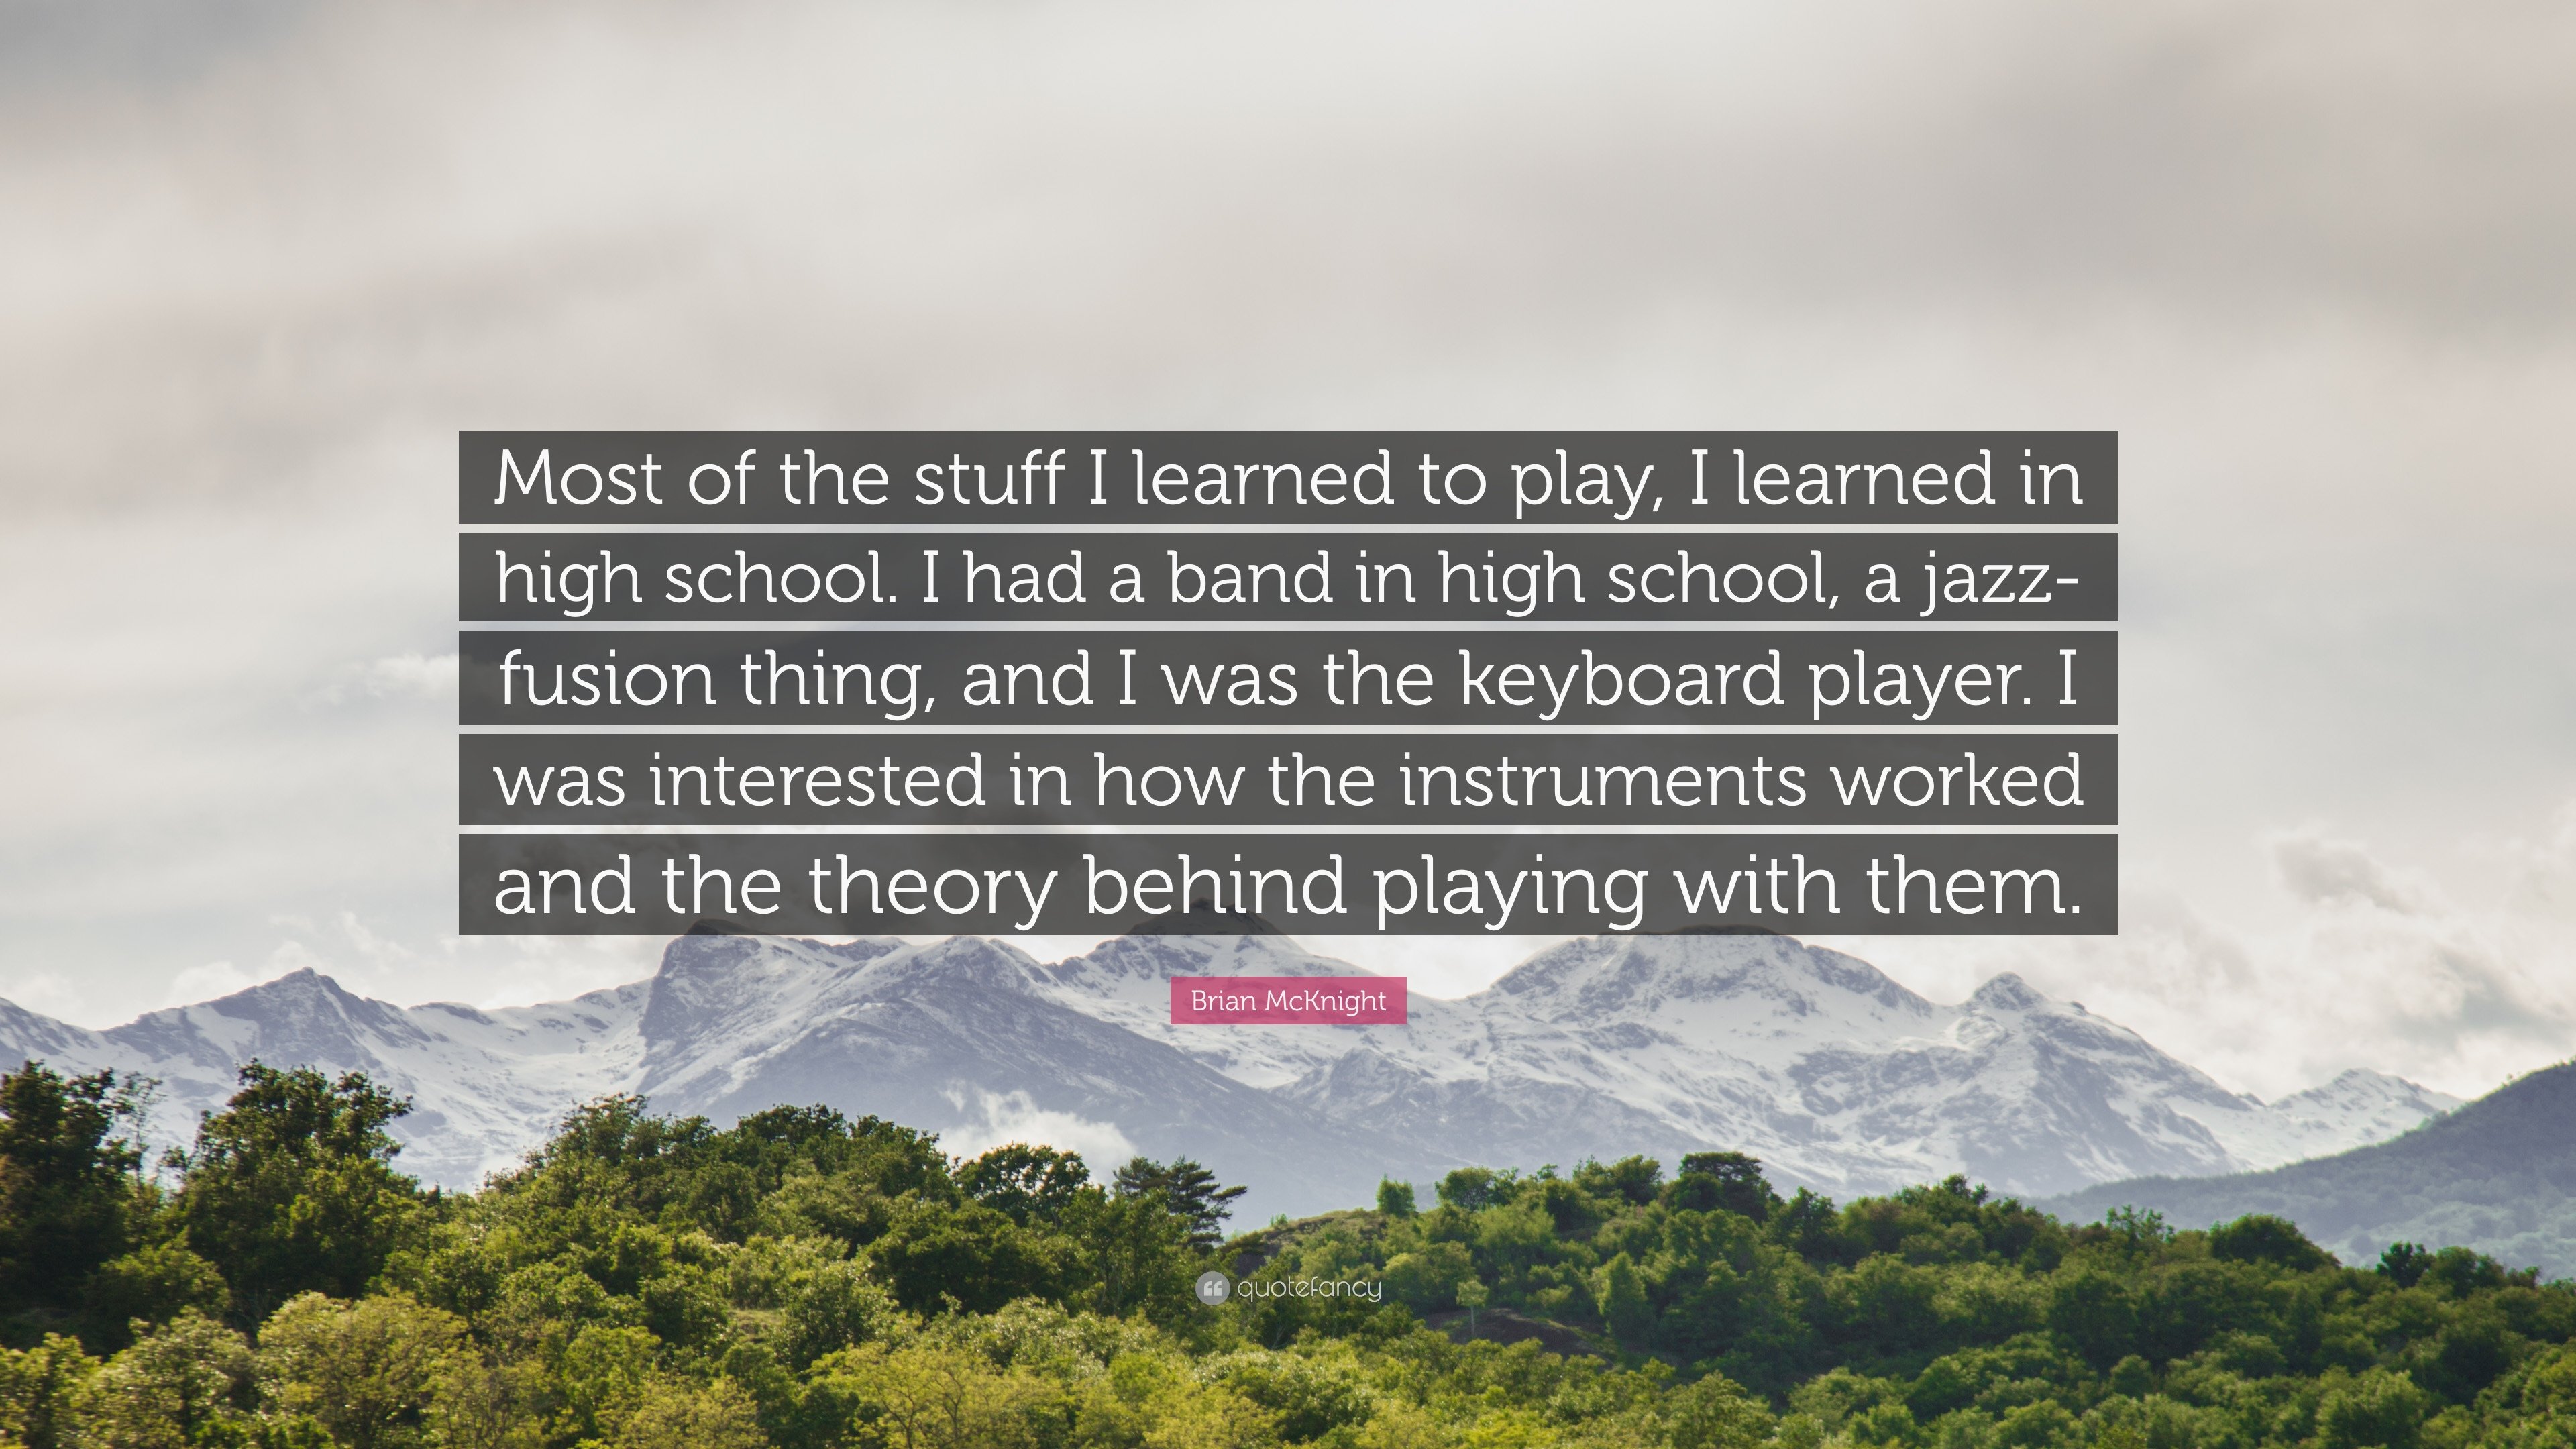 Brian McKnight Quote: “Most of the stuff I learned to play, I